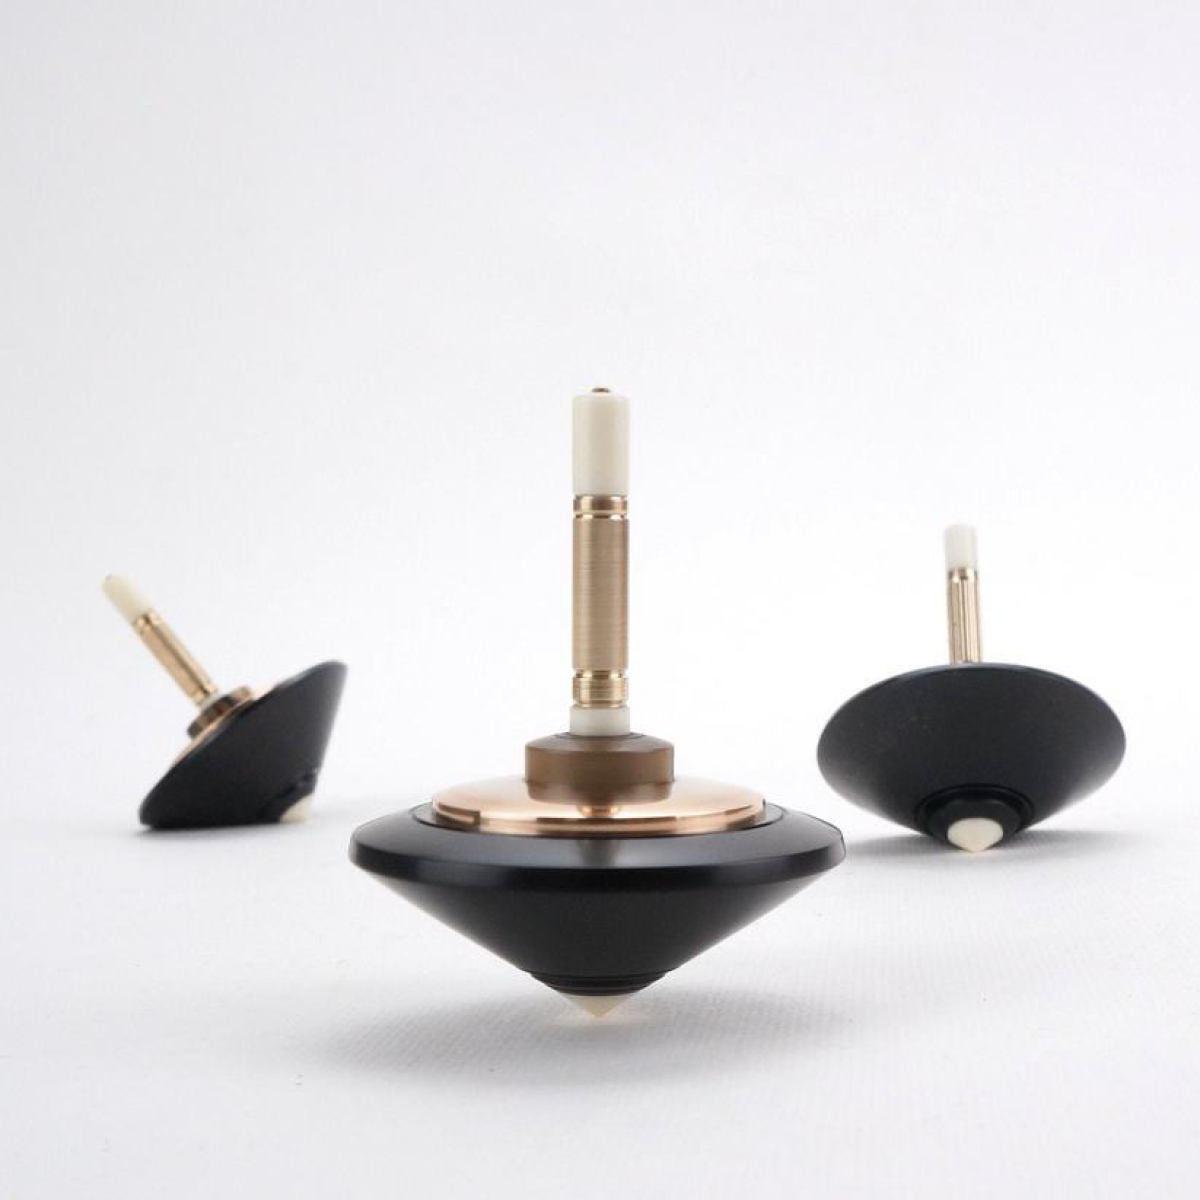 Exclusive Spinning Top made of Fine Woods, Brass and Bone